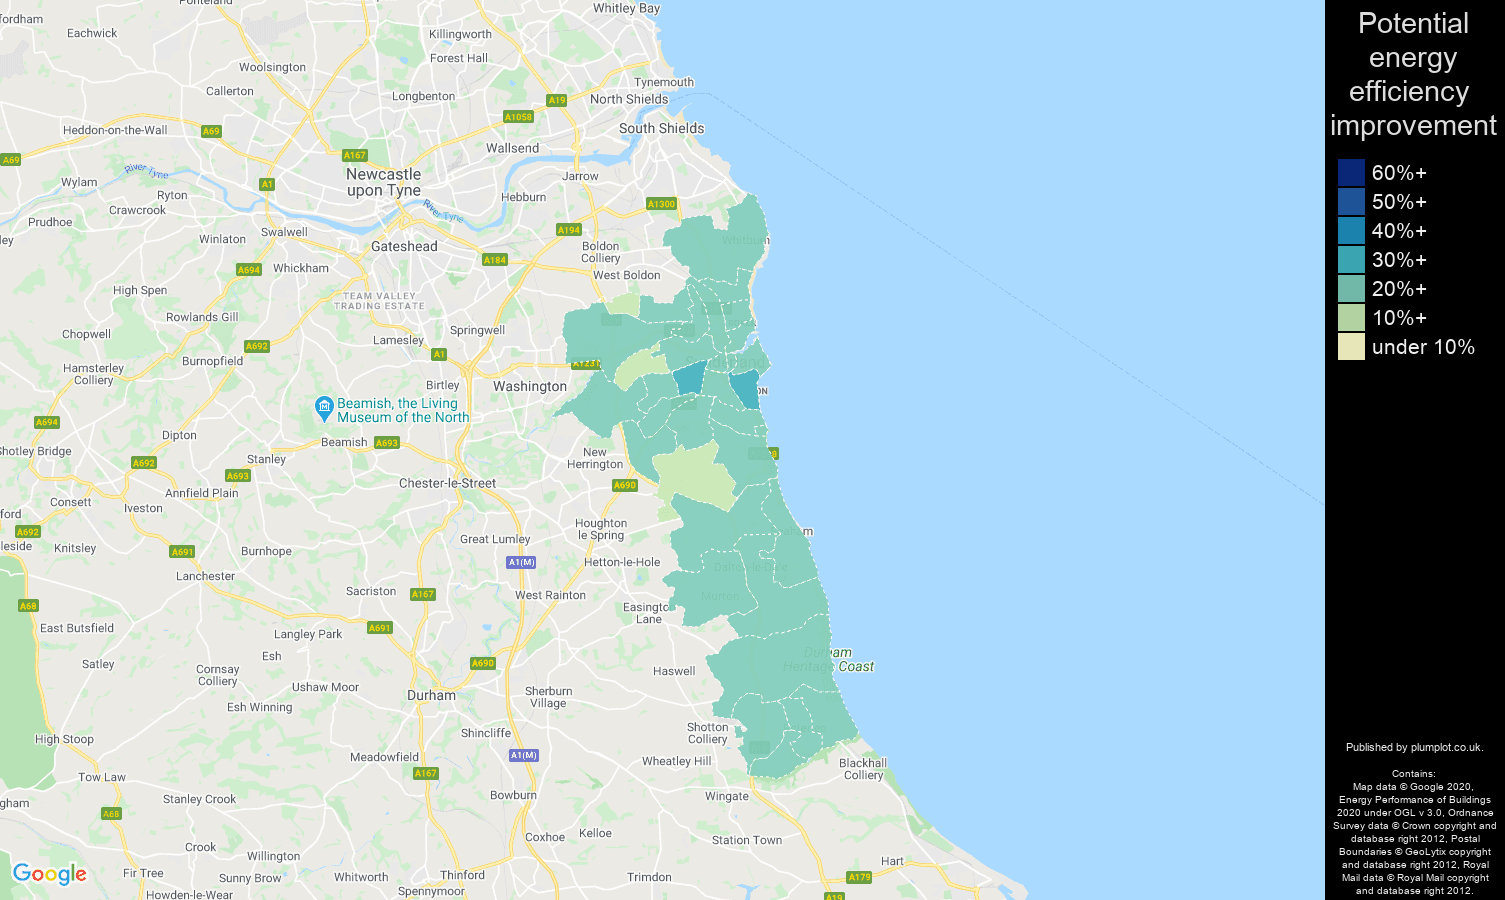 Sunderland map of potential energy efficiency improvement of houses